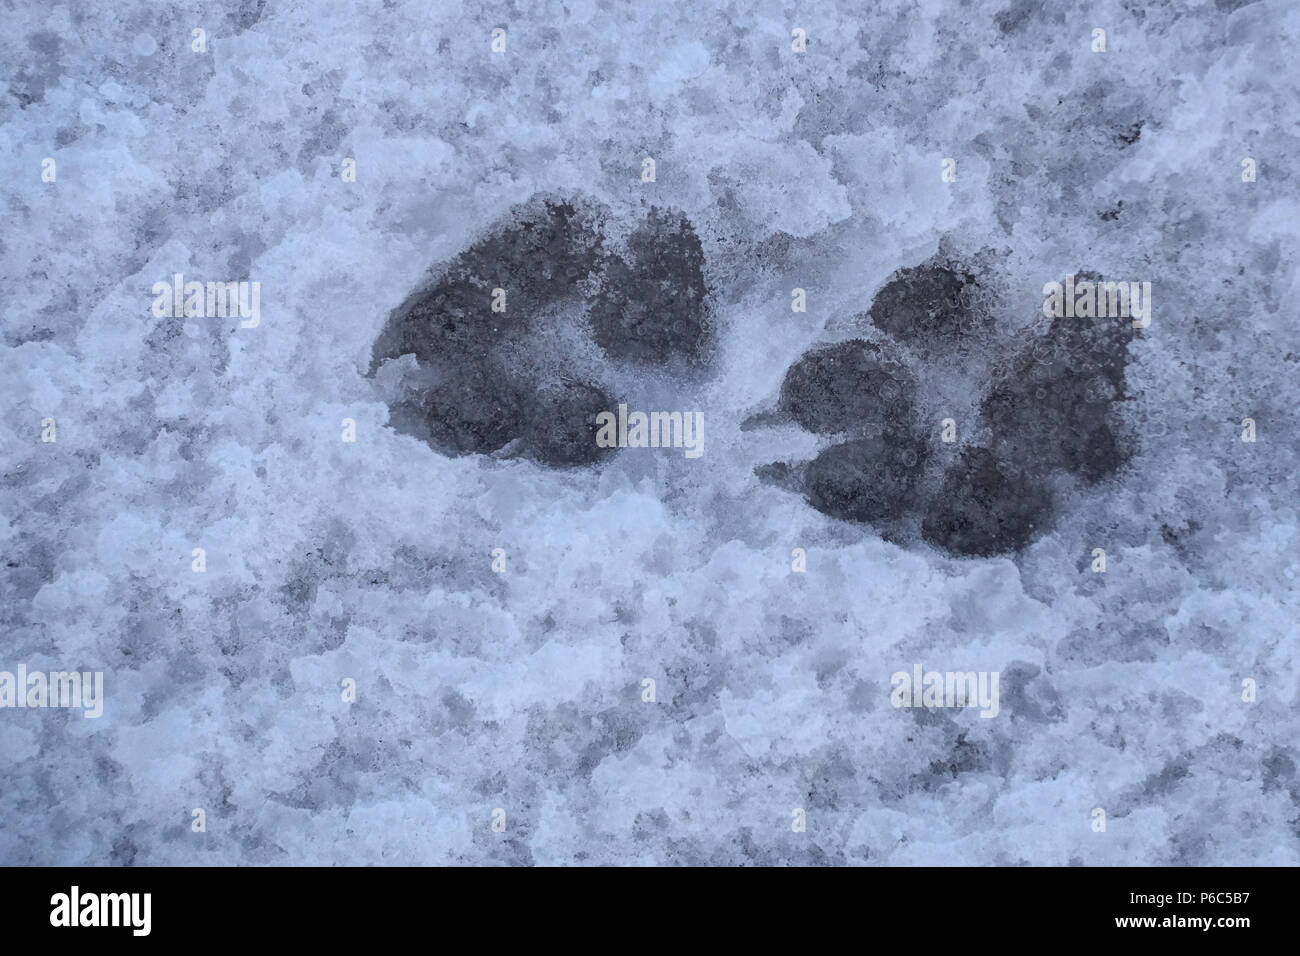 Ahlbeck, Germany, paw prints of a dog in the snow Stock Photo